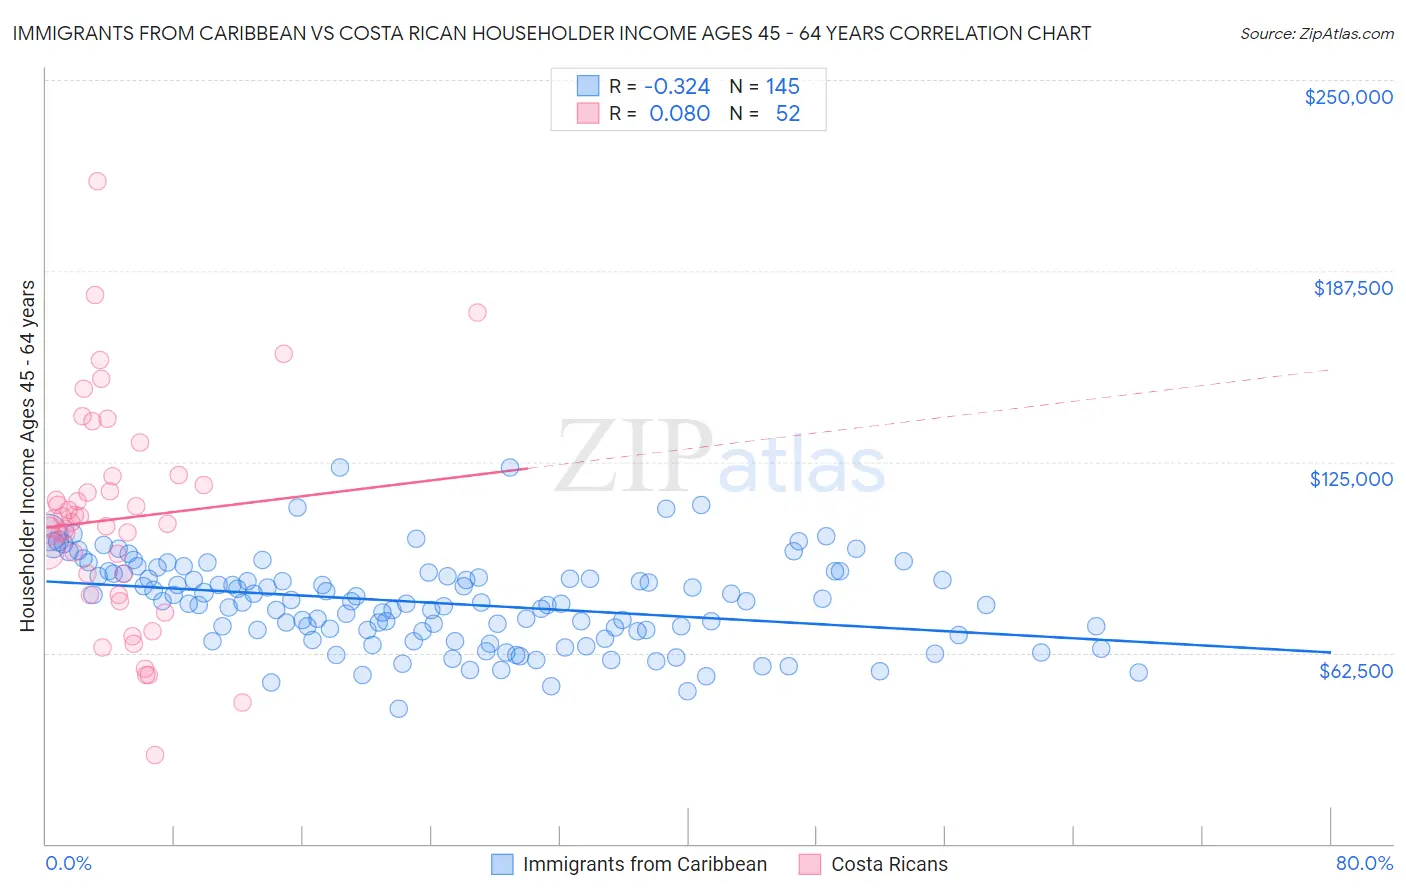 Immigrants from Caribbean vs Costa Rican Householder Income Ages 45 - 64 years